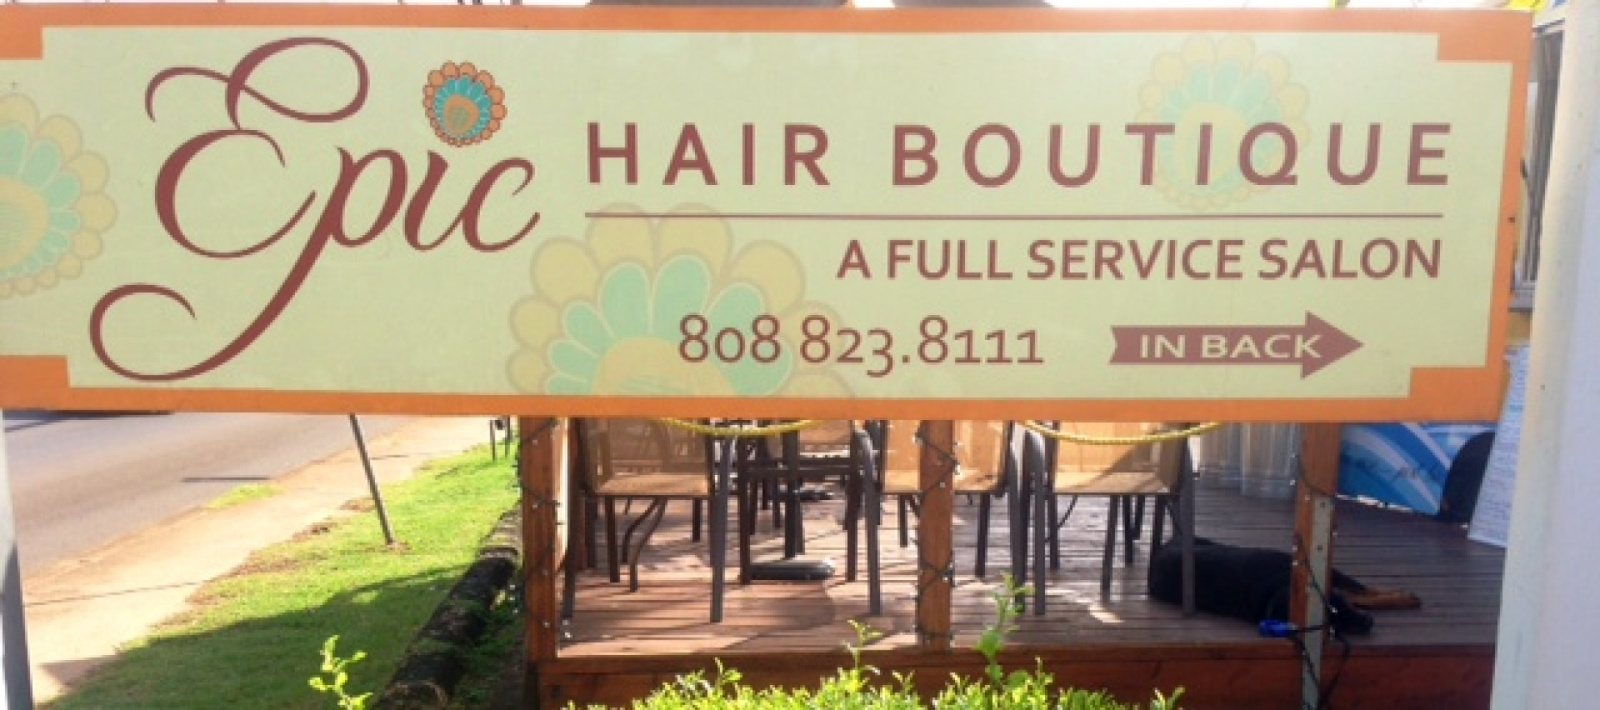 Review of Epic Hair Boutique with Information